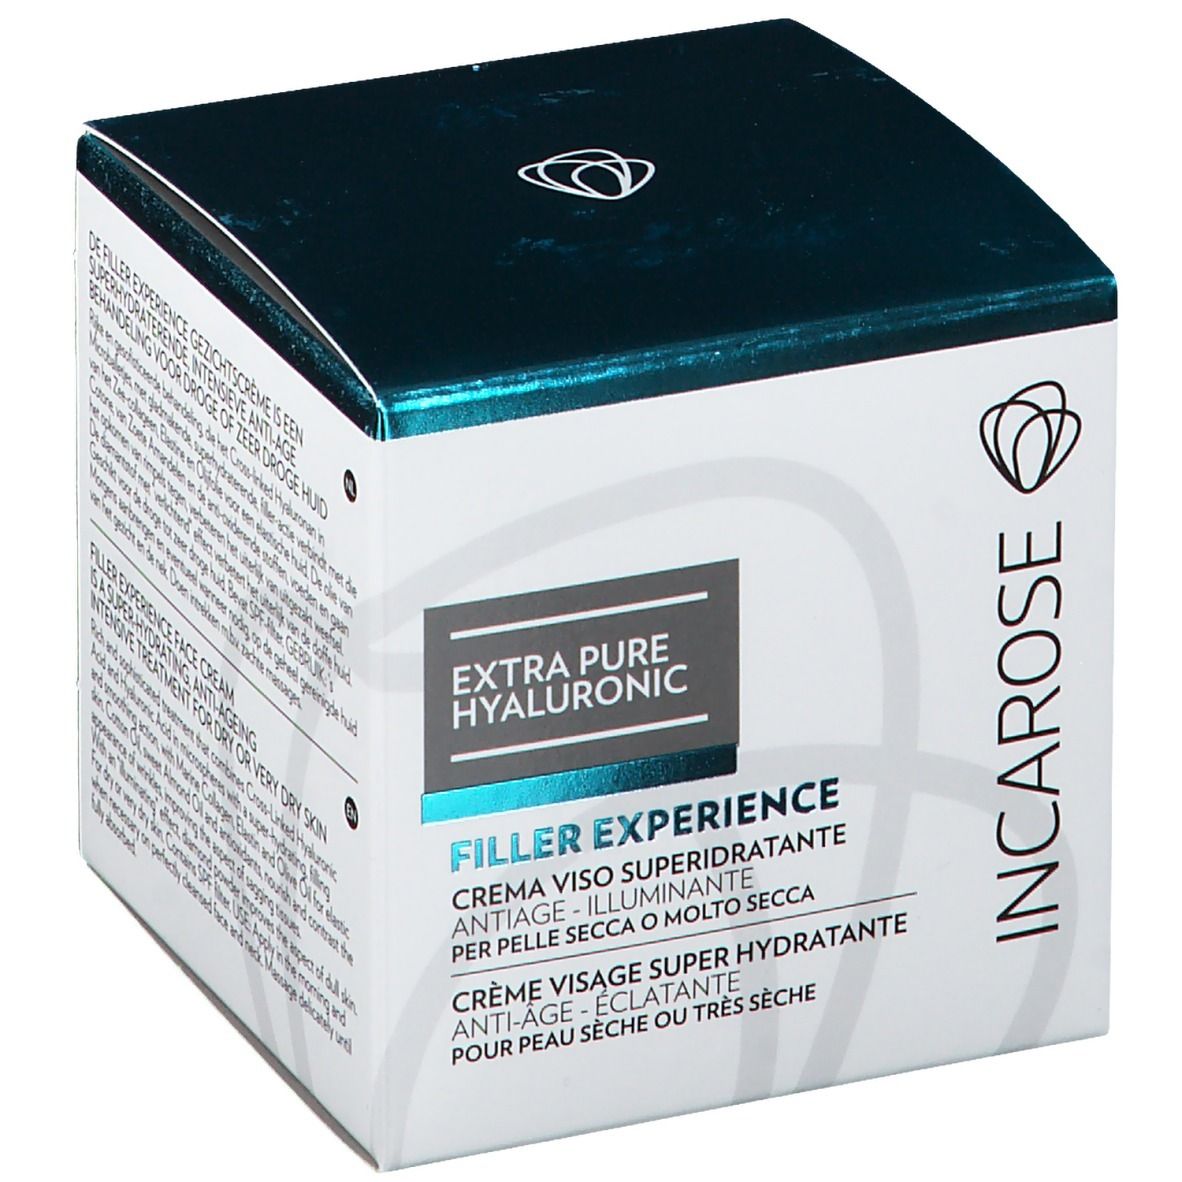 EUROPHARMA Incarose® Extra Pure Hyaluronic Filler Experience Super Hydrating Anti-Aging Gesichtscreme